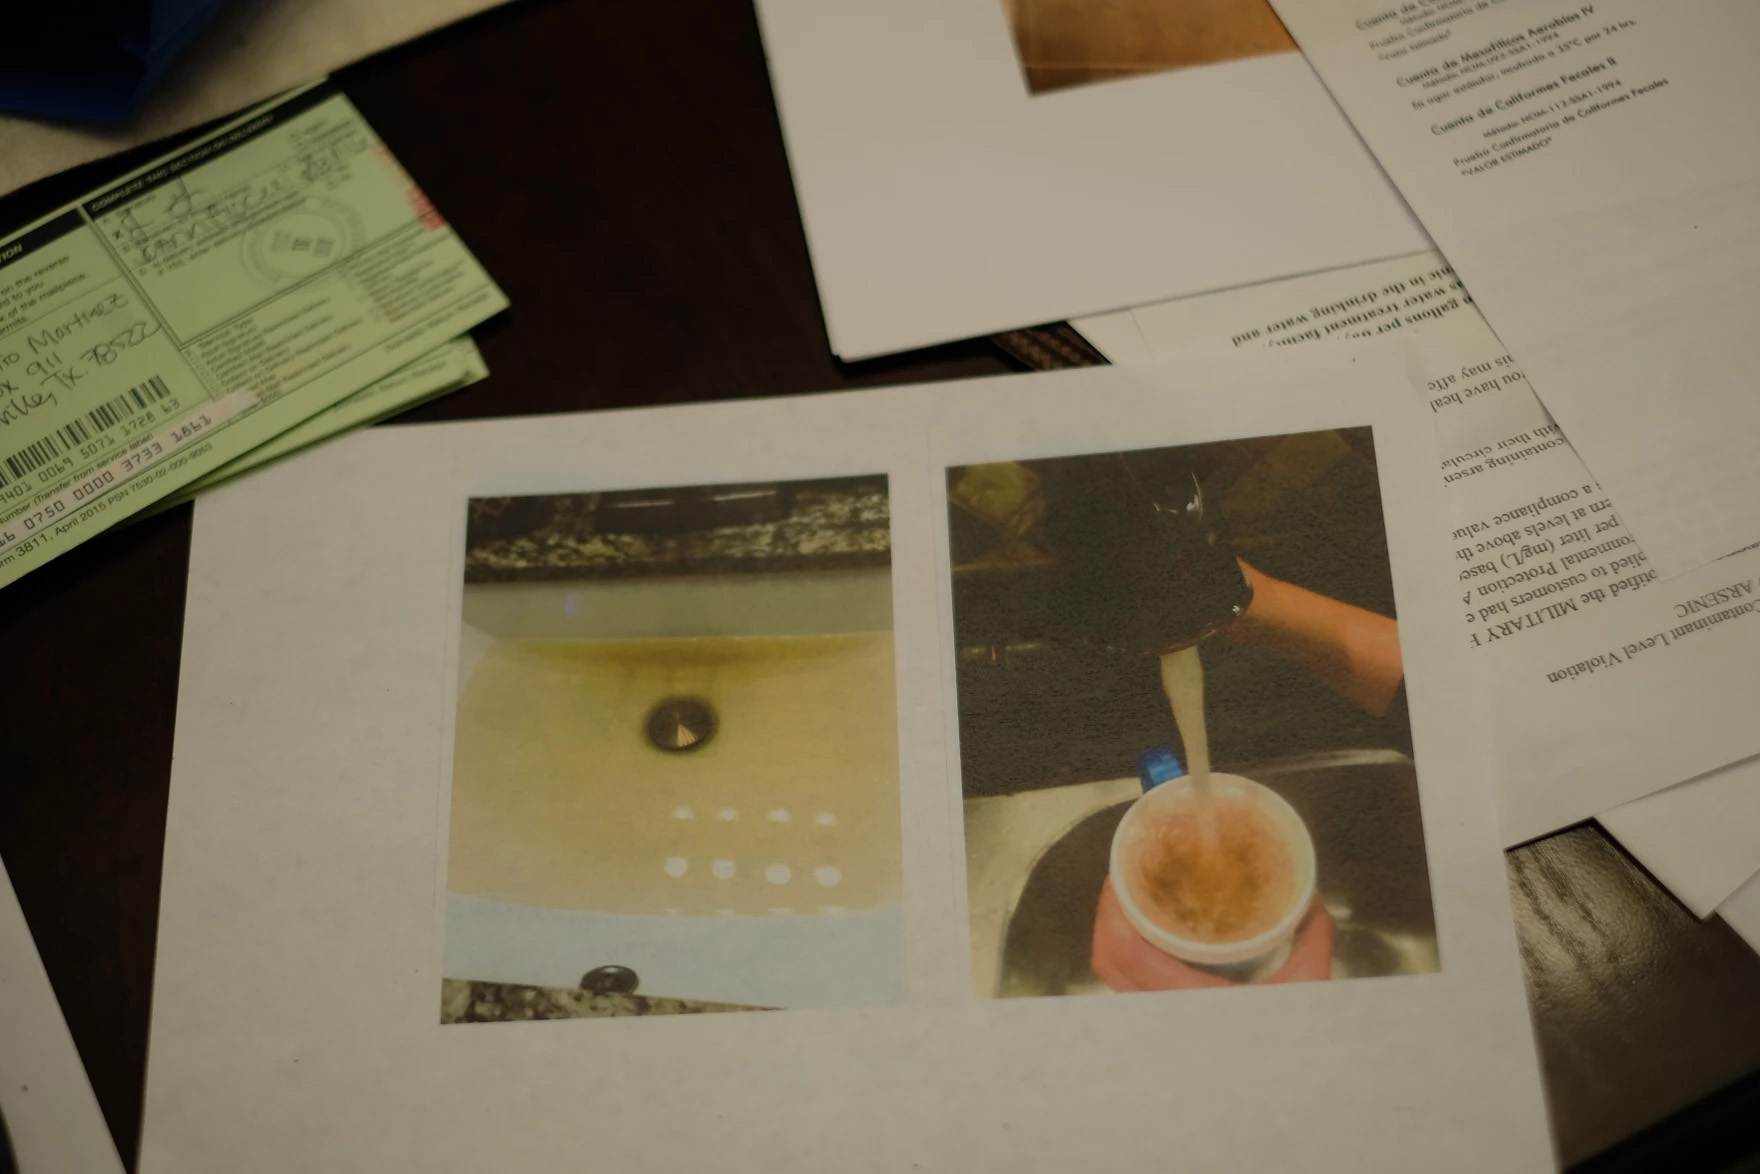 A paper is seen on which two photos are printed, both showing brown-tinged water.